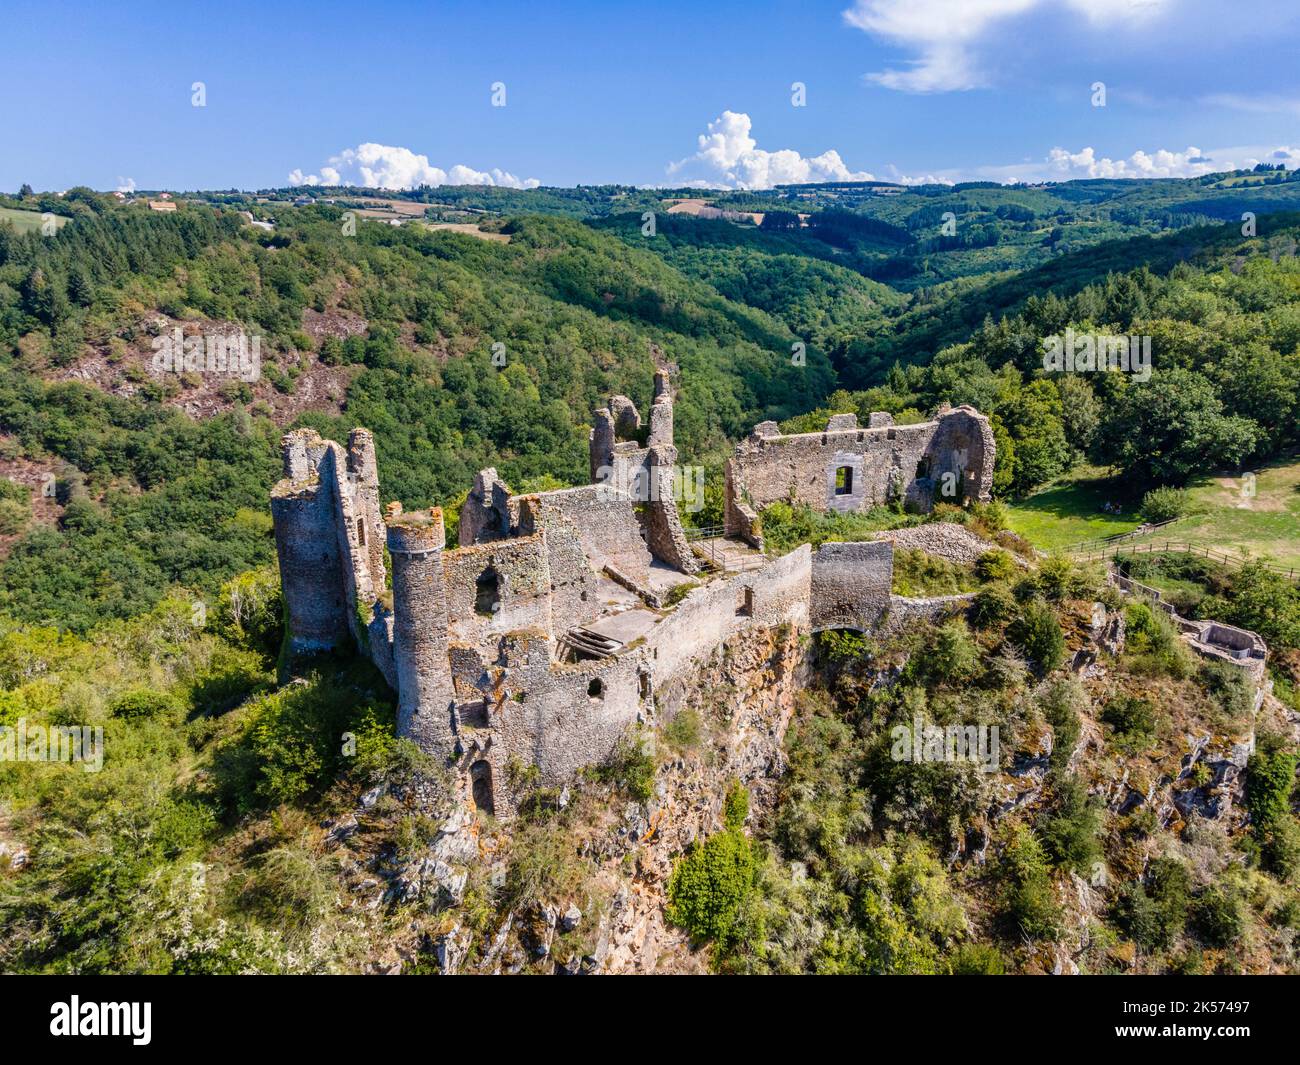 France, Puy de Dome, Saint Remy de Blot, Chateau Rocher, fortress of the 12th century overlooking the Sioule Gorges (aerial view) Stock Photo